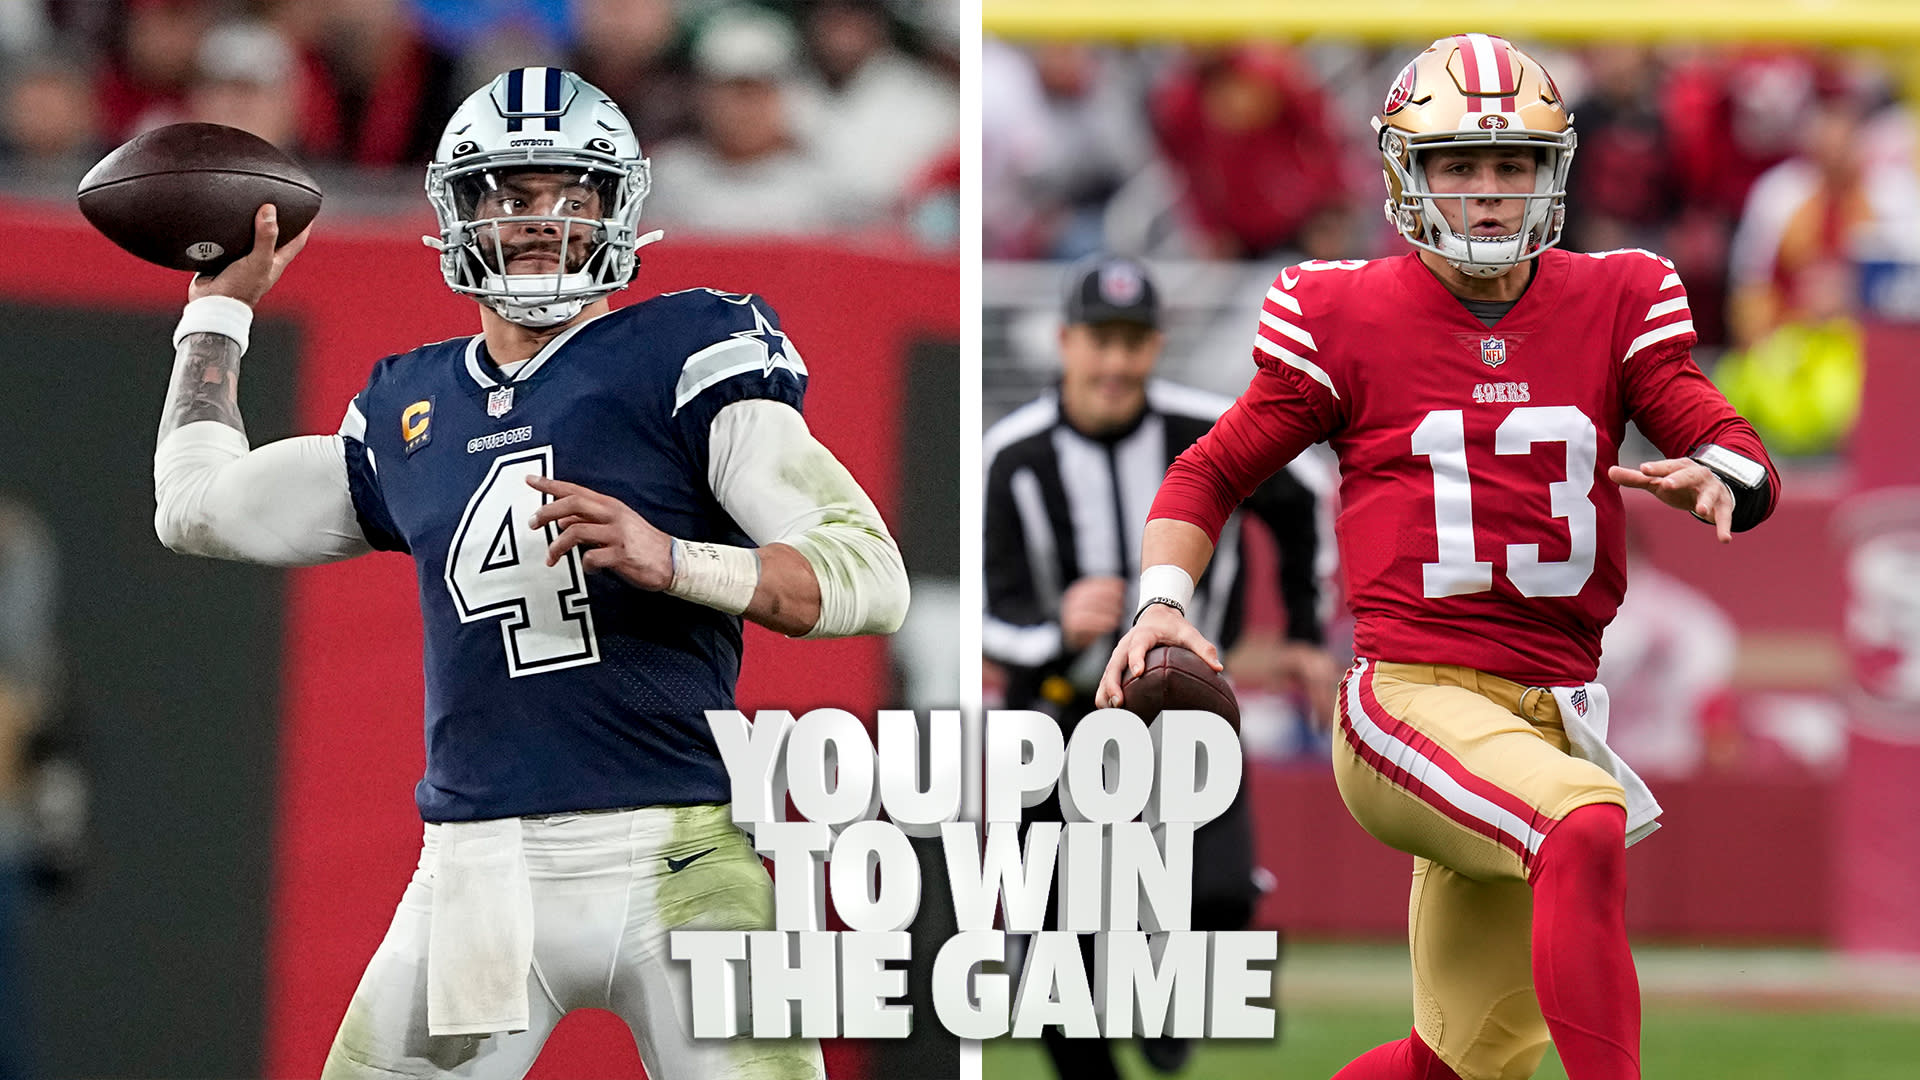 What makes Cowboys vs 49ers such an intriguing matchup?